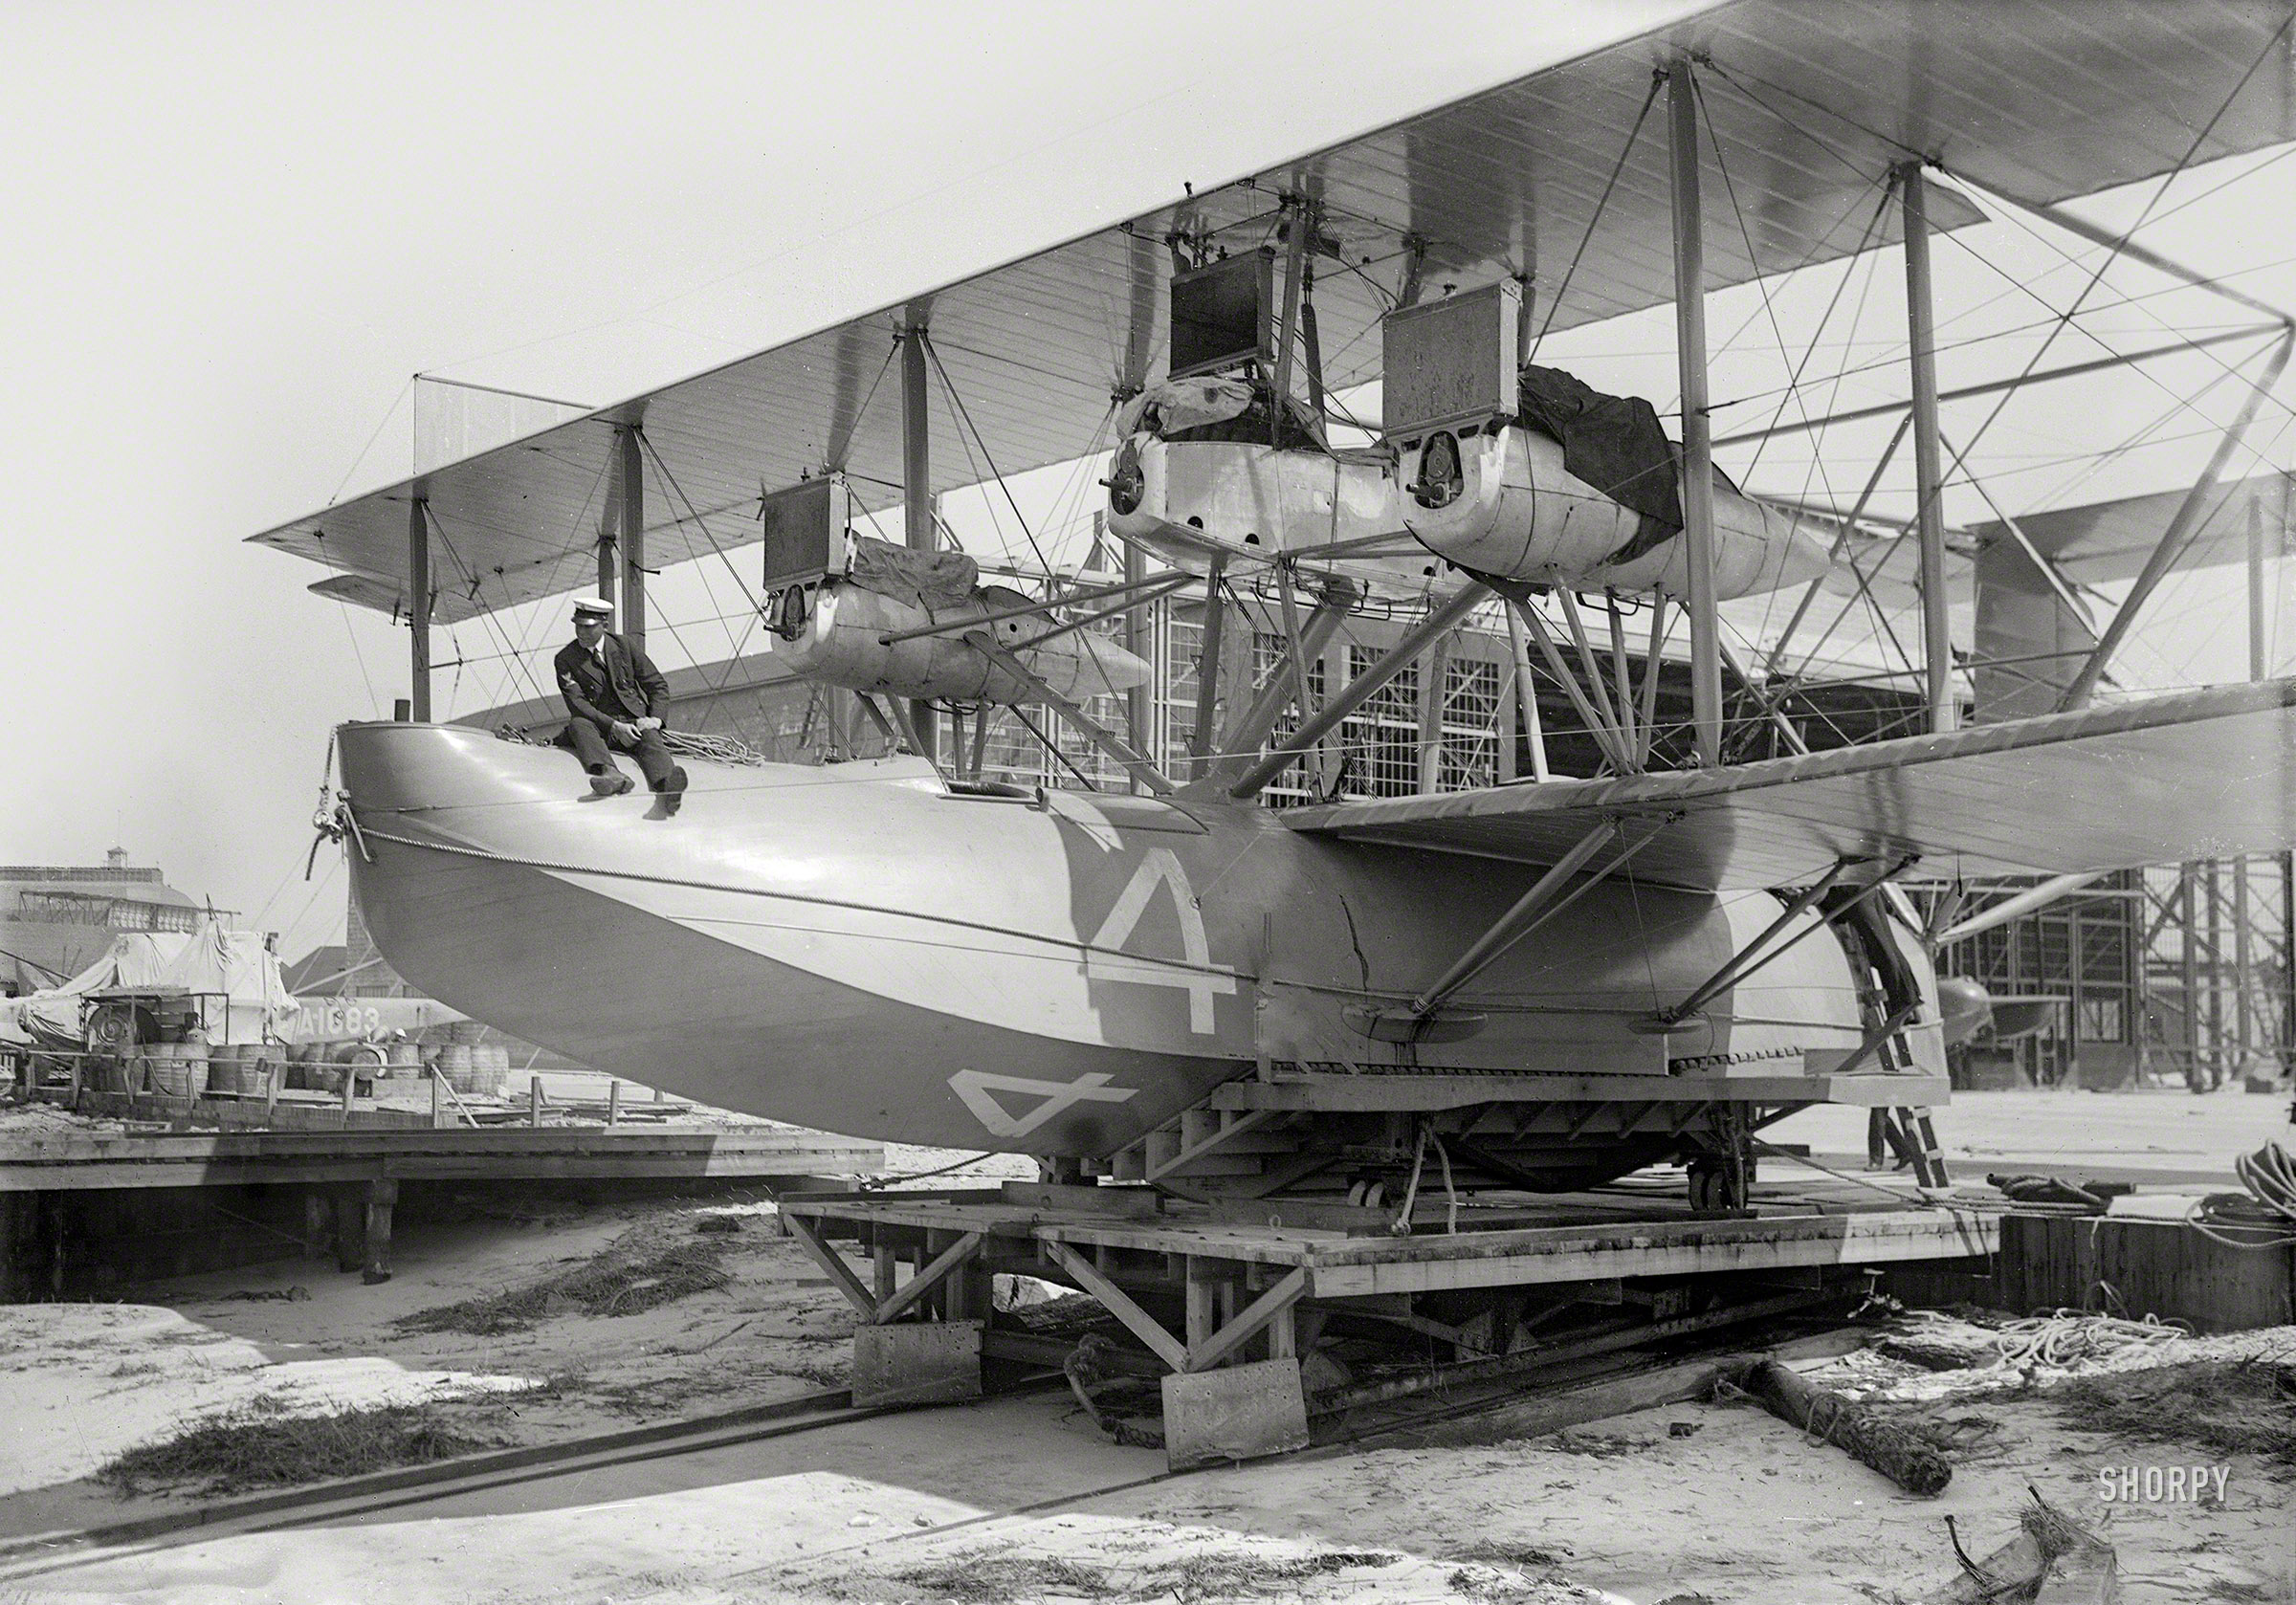 &nbsp; &nbsp; &nbsp; &nbsp; 100 years ago saw the first trans-Atlantic flight, and it wasn’t Lindbergh’s. A giant Navy seaplane flew from Queens to the Azores in 1919, eight years before the Spirit of St. Louis. It took three weeks. It wasn’t nonstop. — N.Y. Times
May 1919. "The NC-4 Curtiss flying boat, designed by Glenn Curtiss, at Rockaway Beach, Long Island, New York. The NC-4 was the first aircraft to cross the Atlantic Ocean as part of the U.S. Navy transatlantic flight attempt." 5x7 glass negative, Bain News Service. View full size.